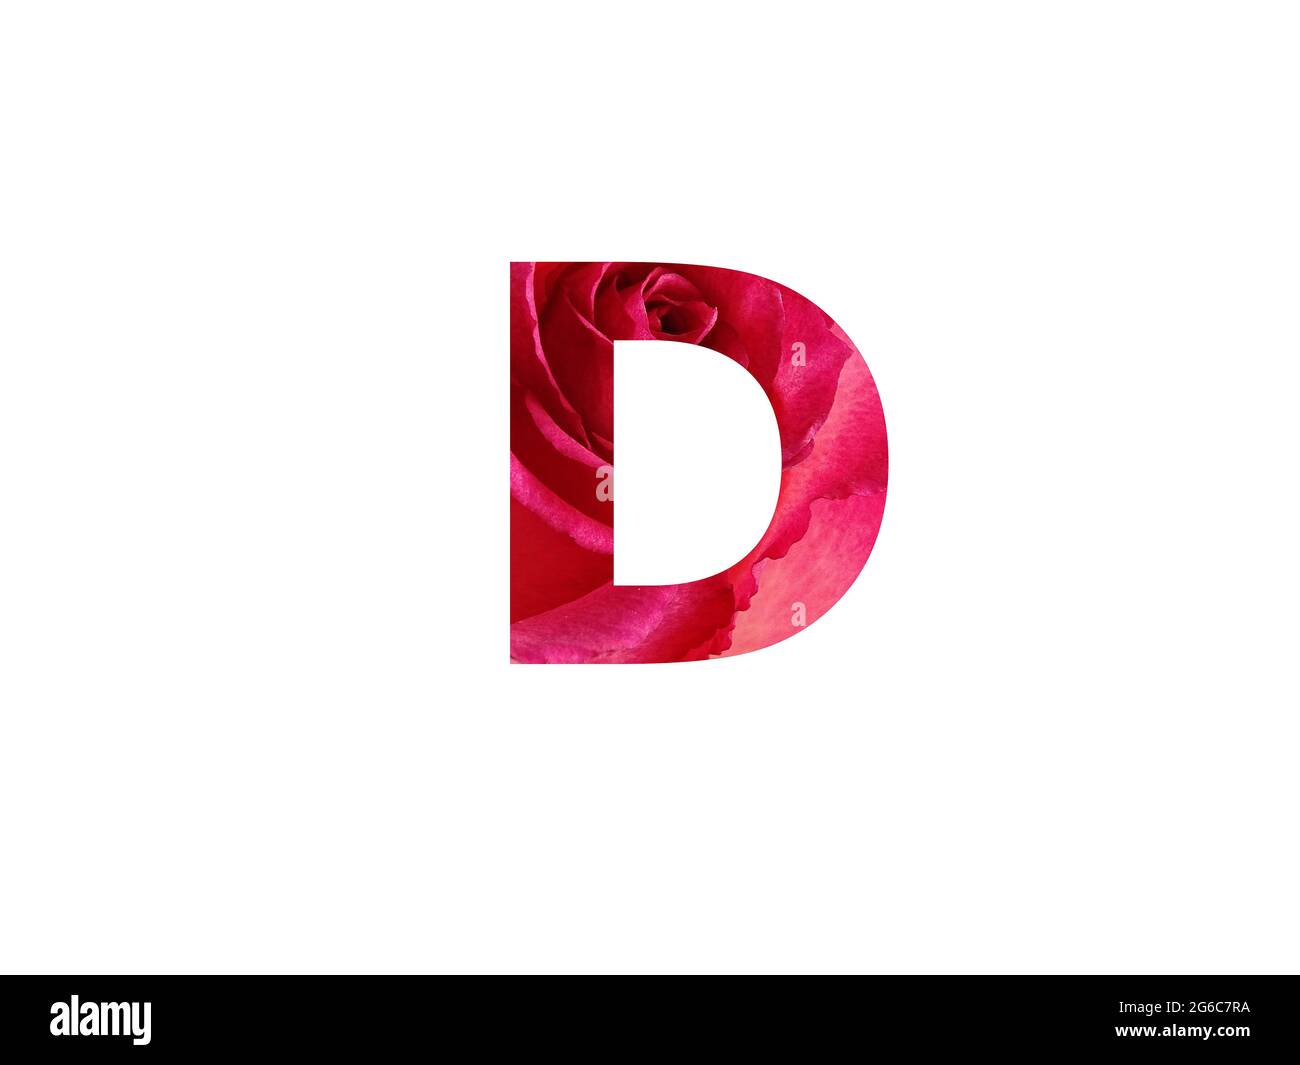 Letter D of the alphabet made with a photo of a red rose, isolated on a white background Stock Photo